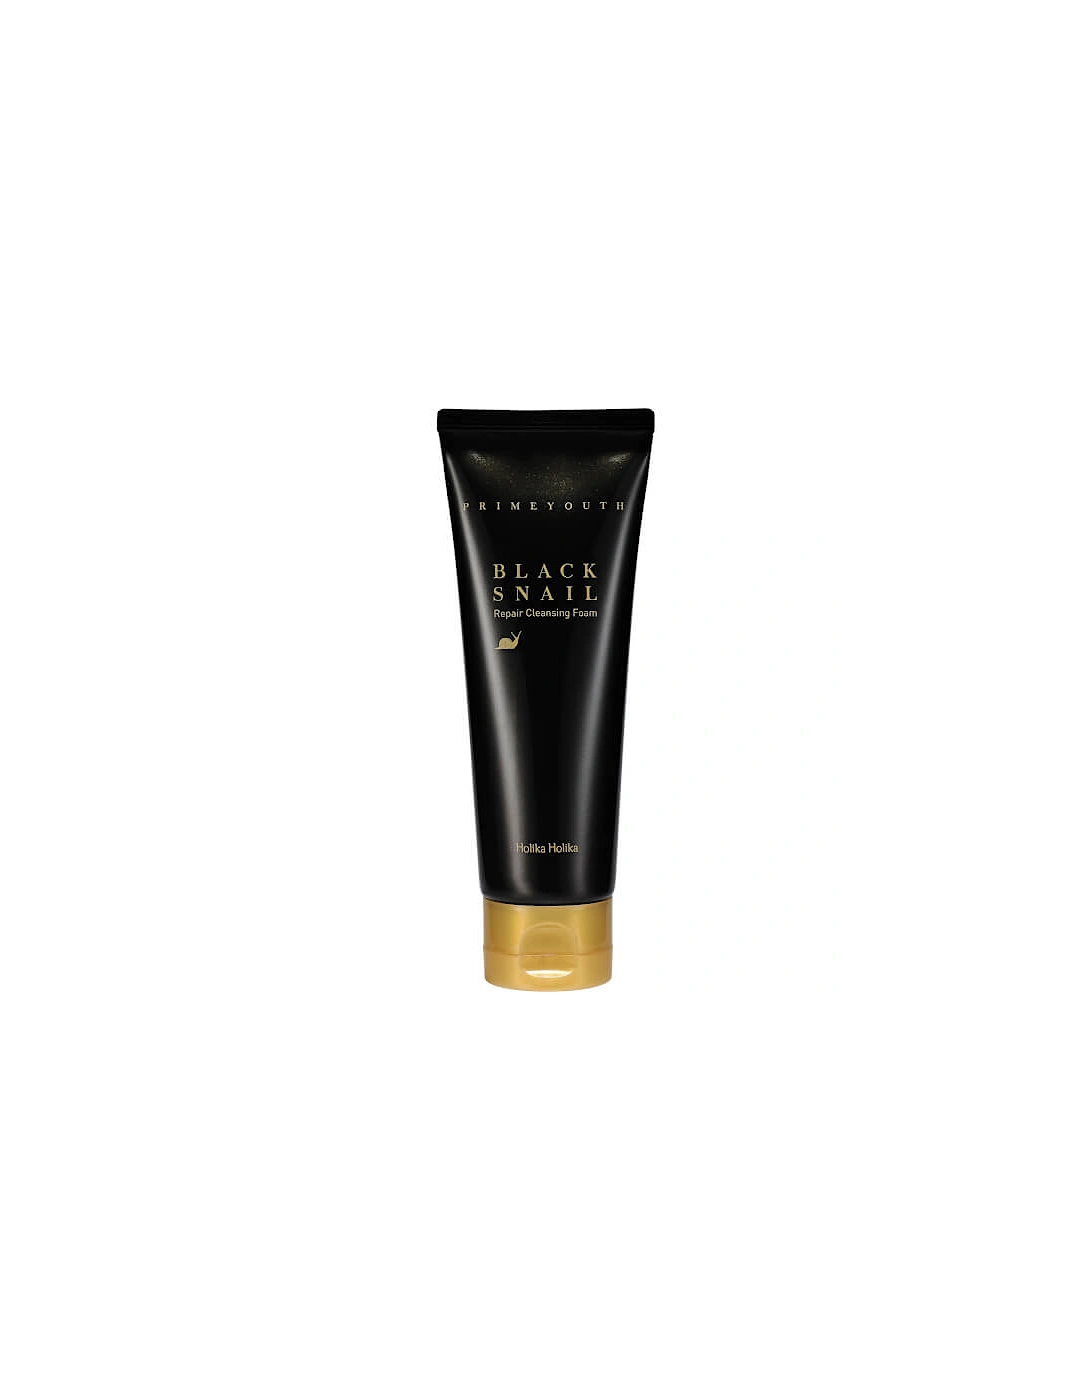 Prime Youth Black Snail Cleansing Foam, 2 of 1